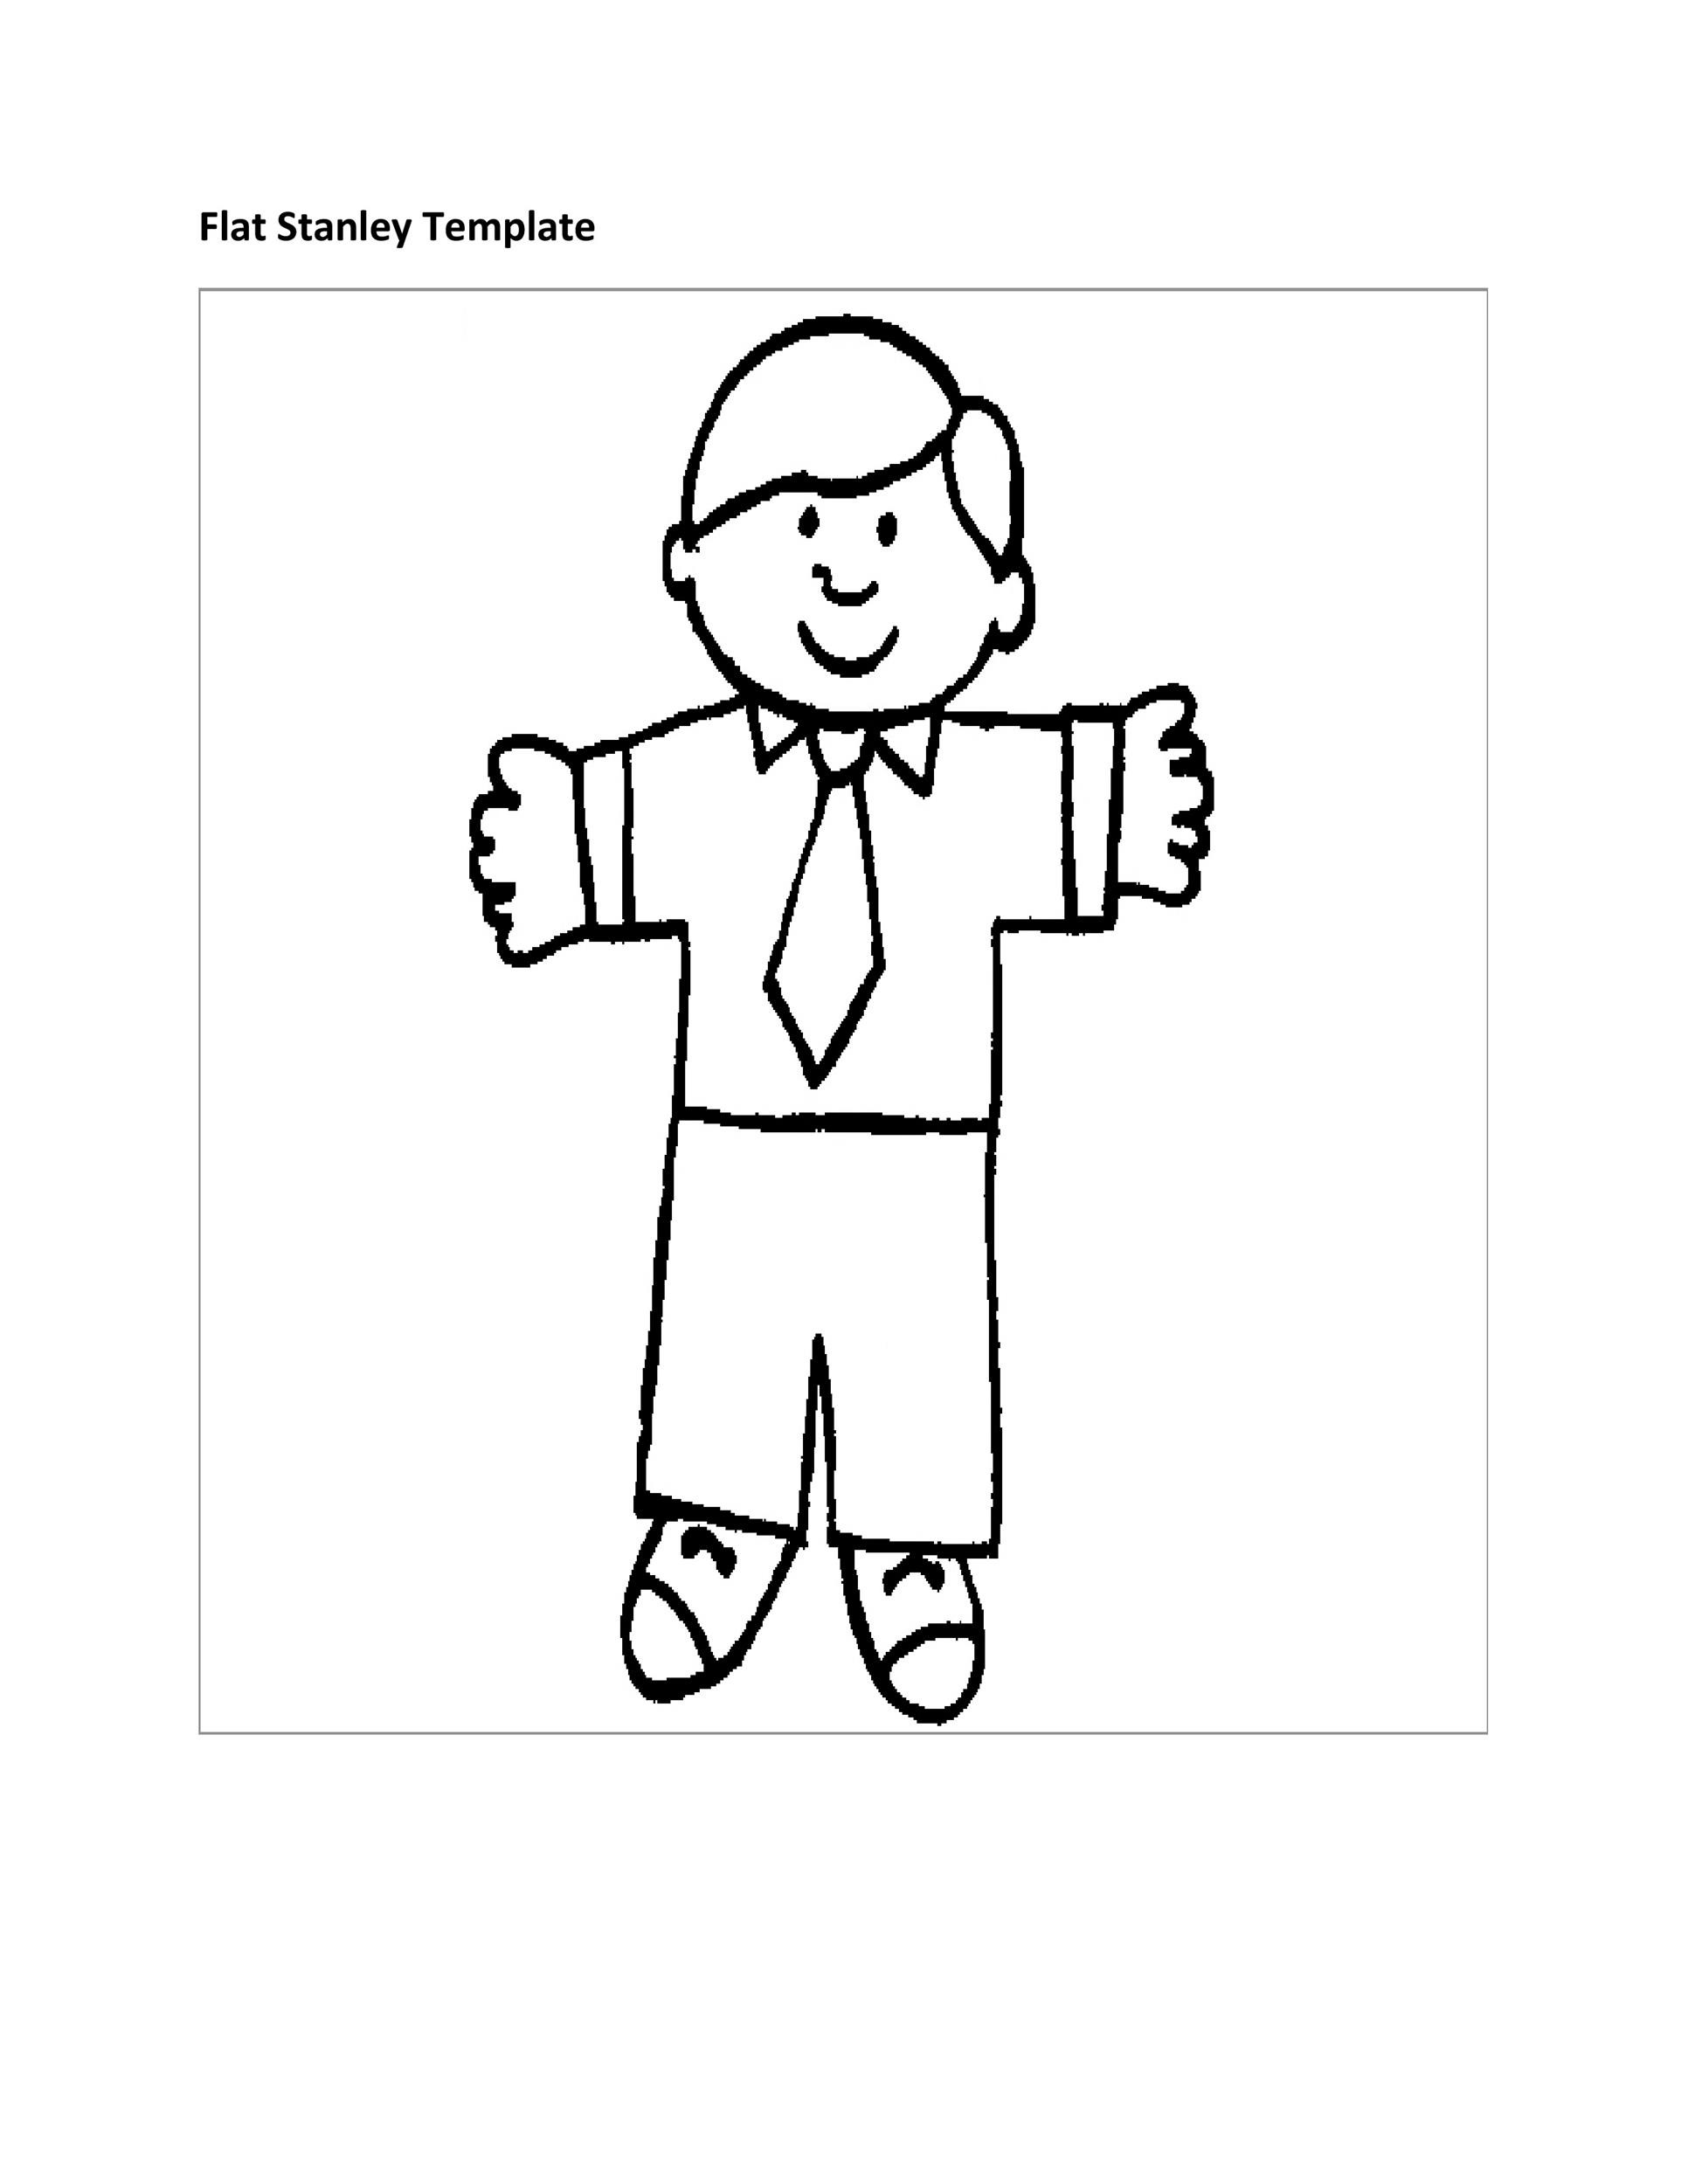 37 Flat Stanley Templates & Letter Examples ᐅ Template Lab